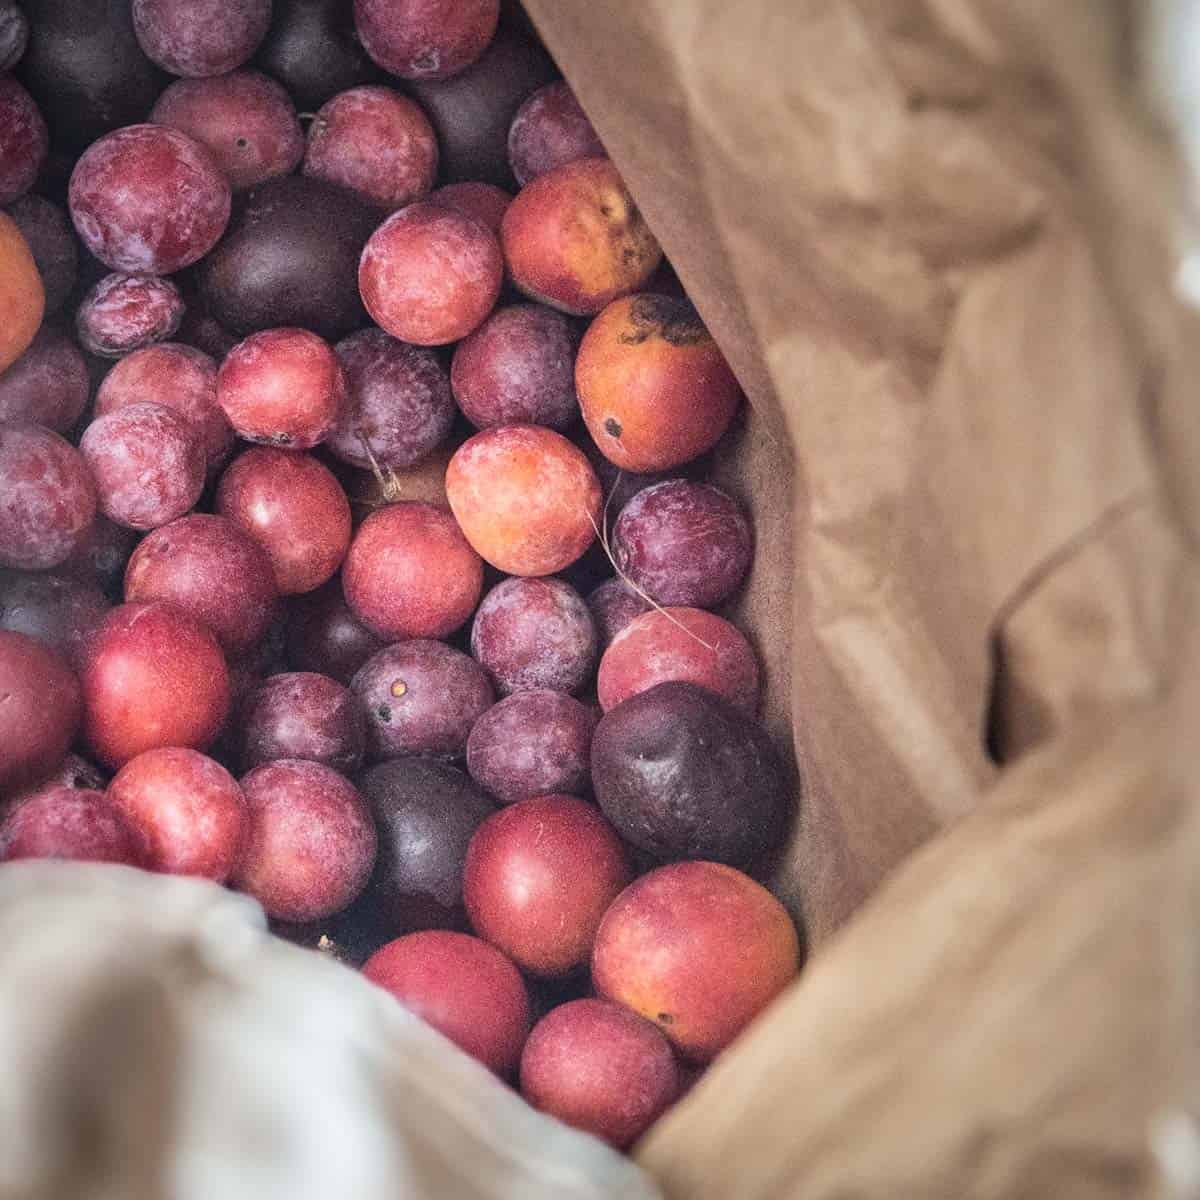 multi-colored wild plums ripening in a paper bag.